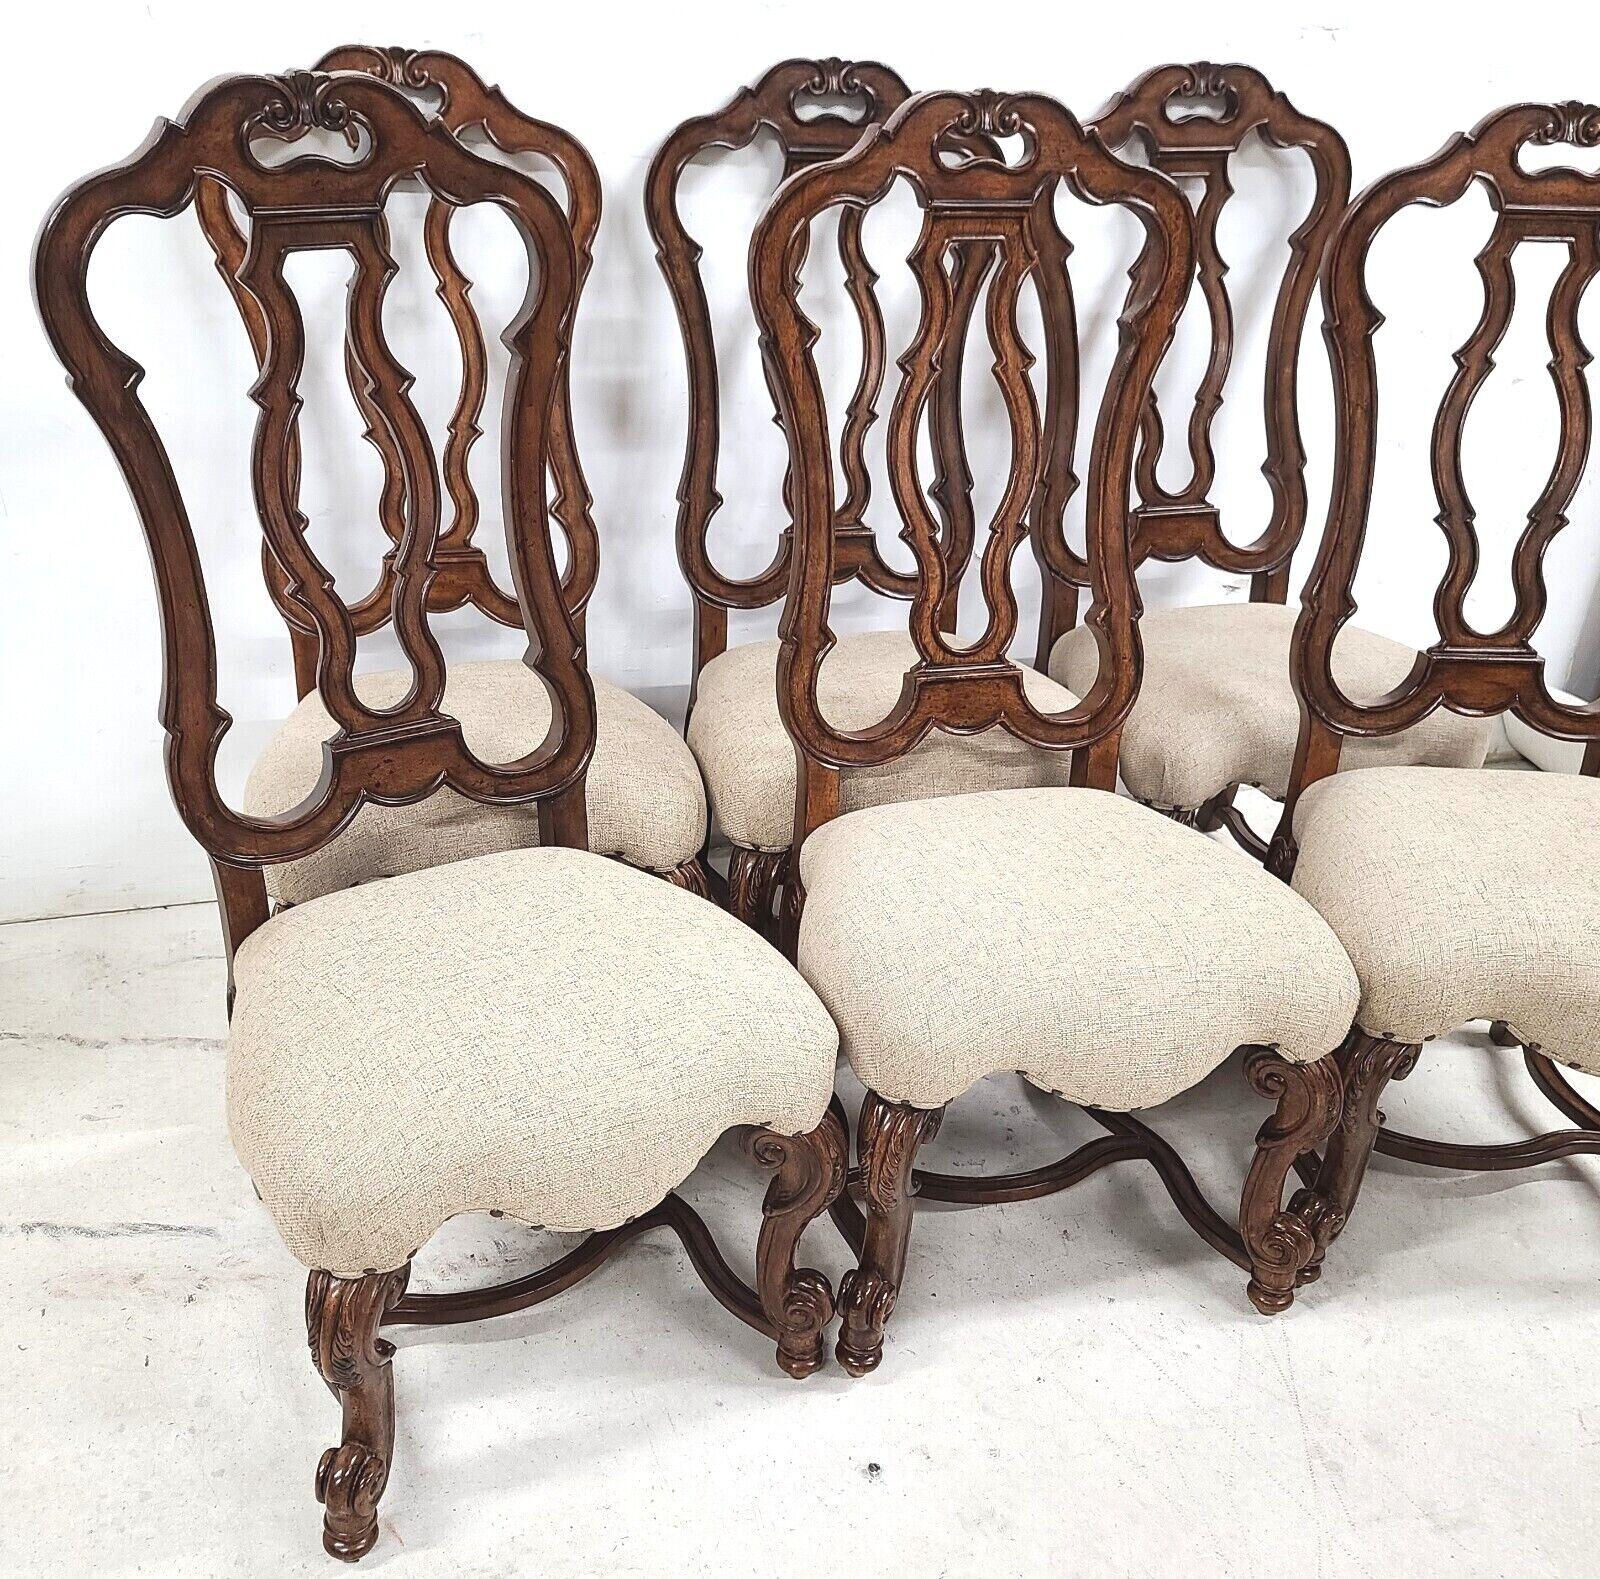 Offering one of our recent palm beach estate fine furniture acquisitions of a
Set of (6) Italian-style Dining Chairs by Universal Furniture.

Approximate measurements in inches
47.5